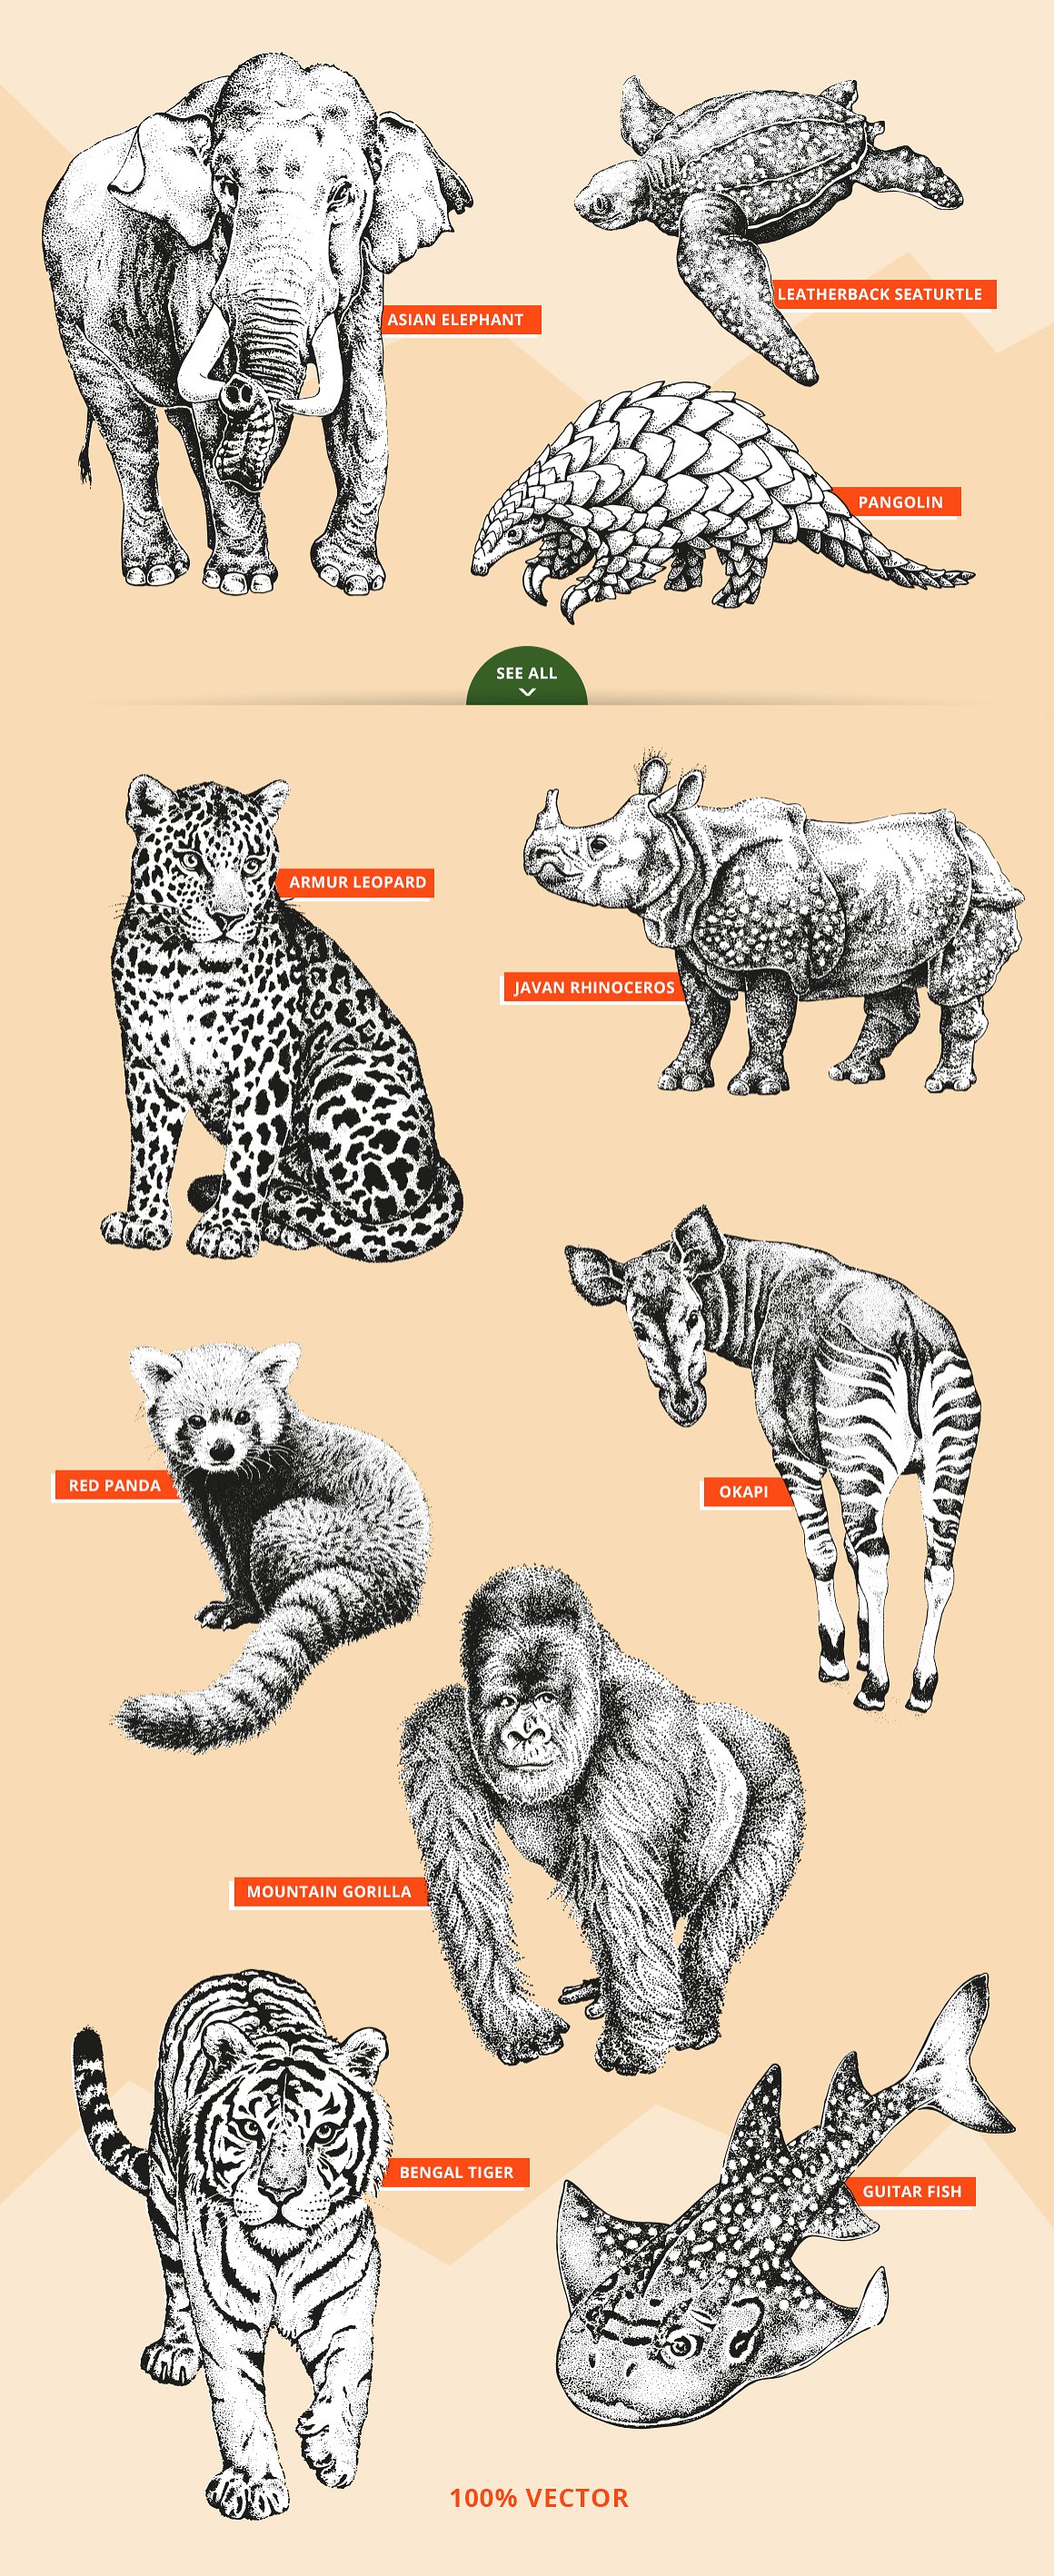 A set of different endangered animals on a pink background.